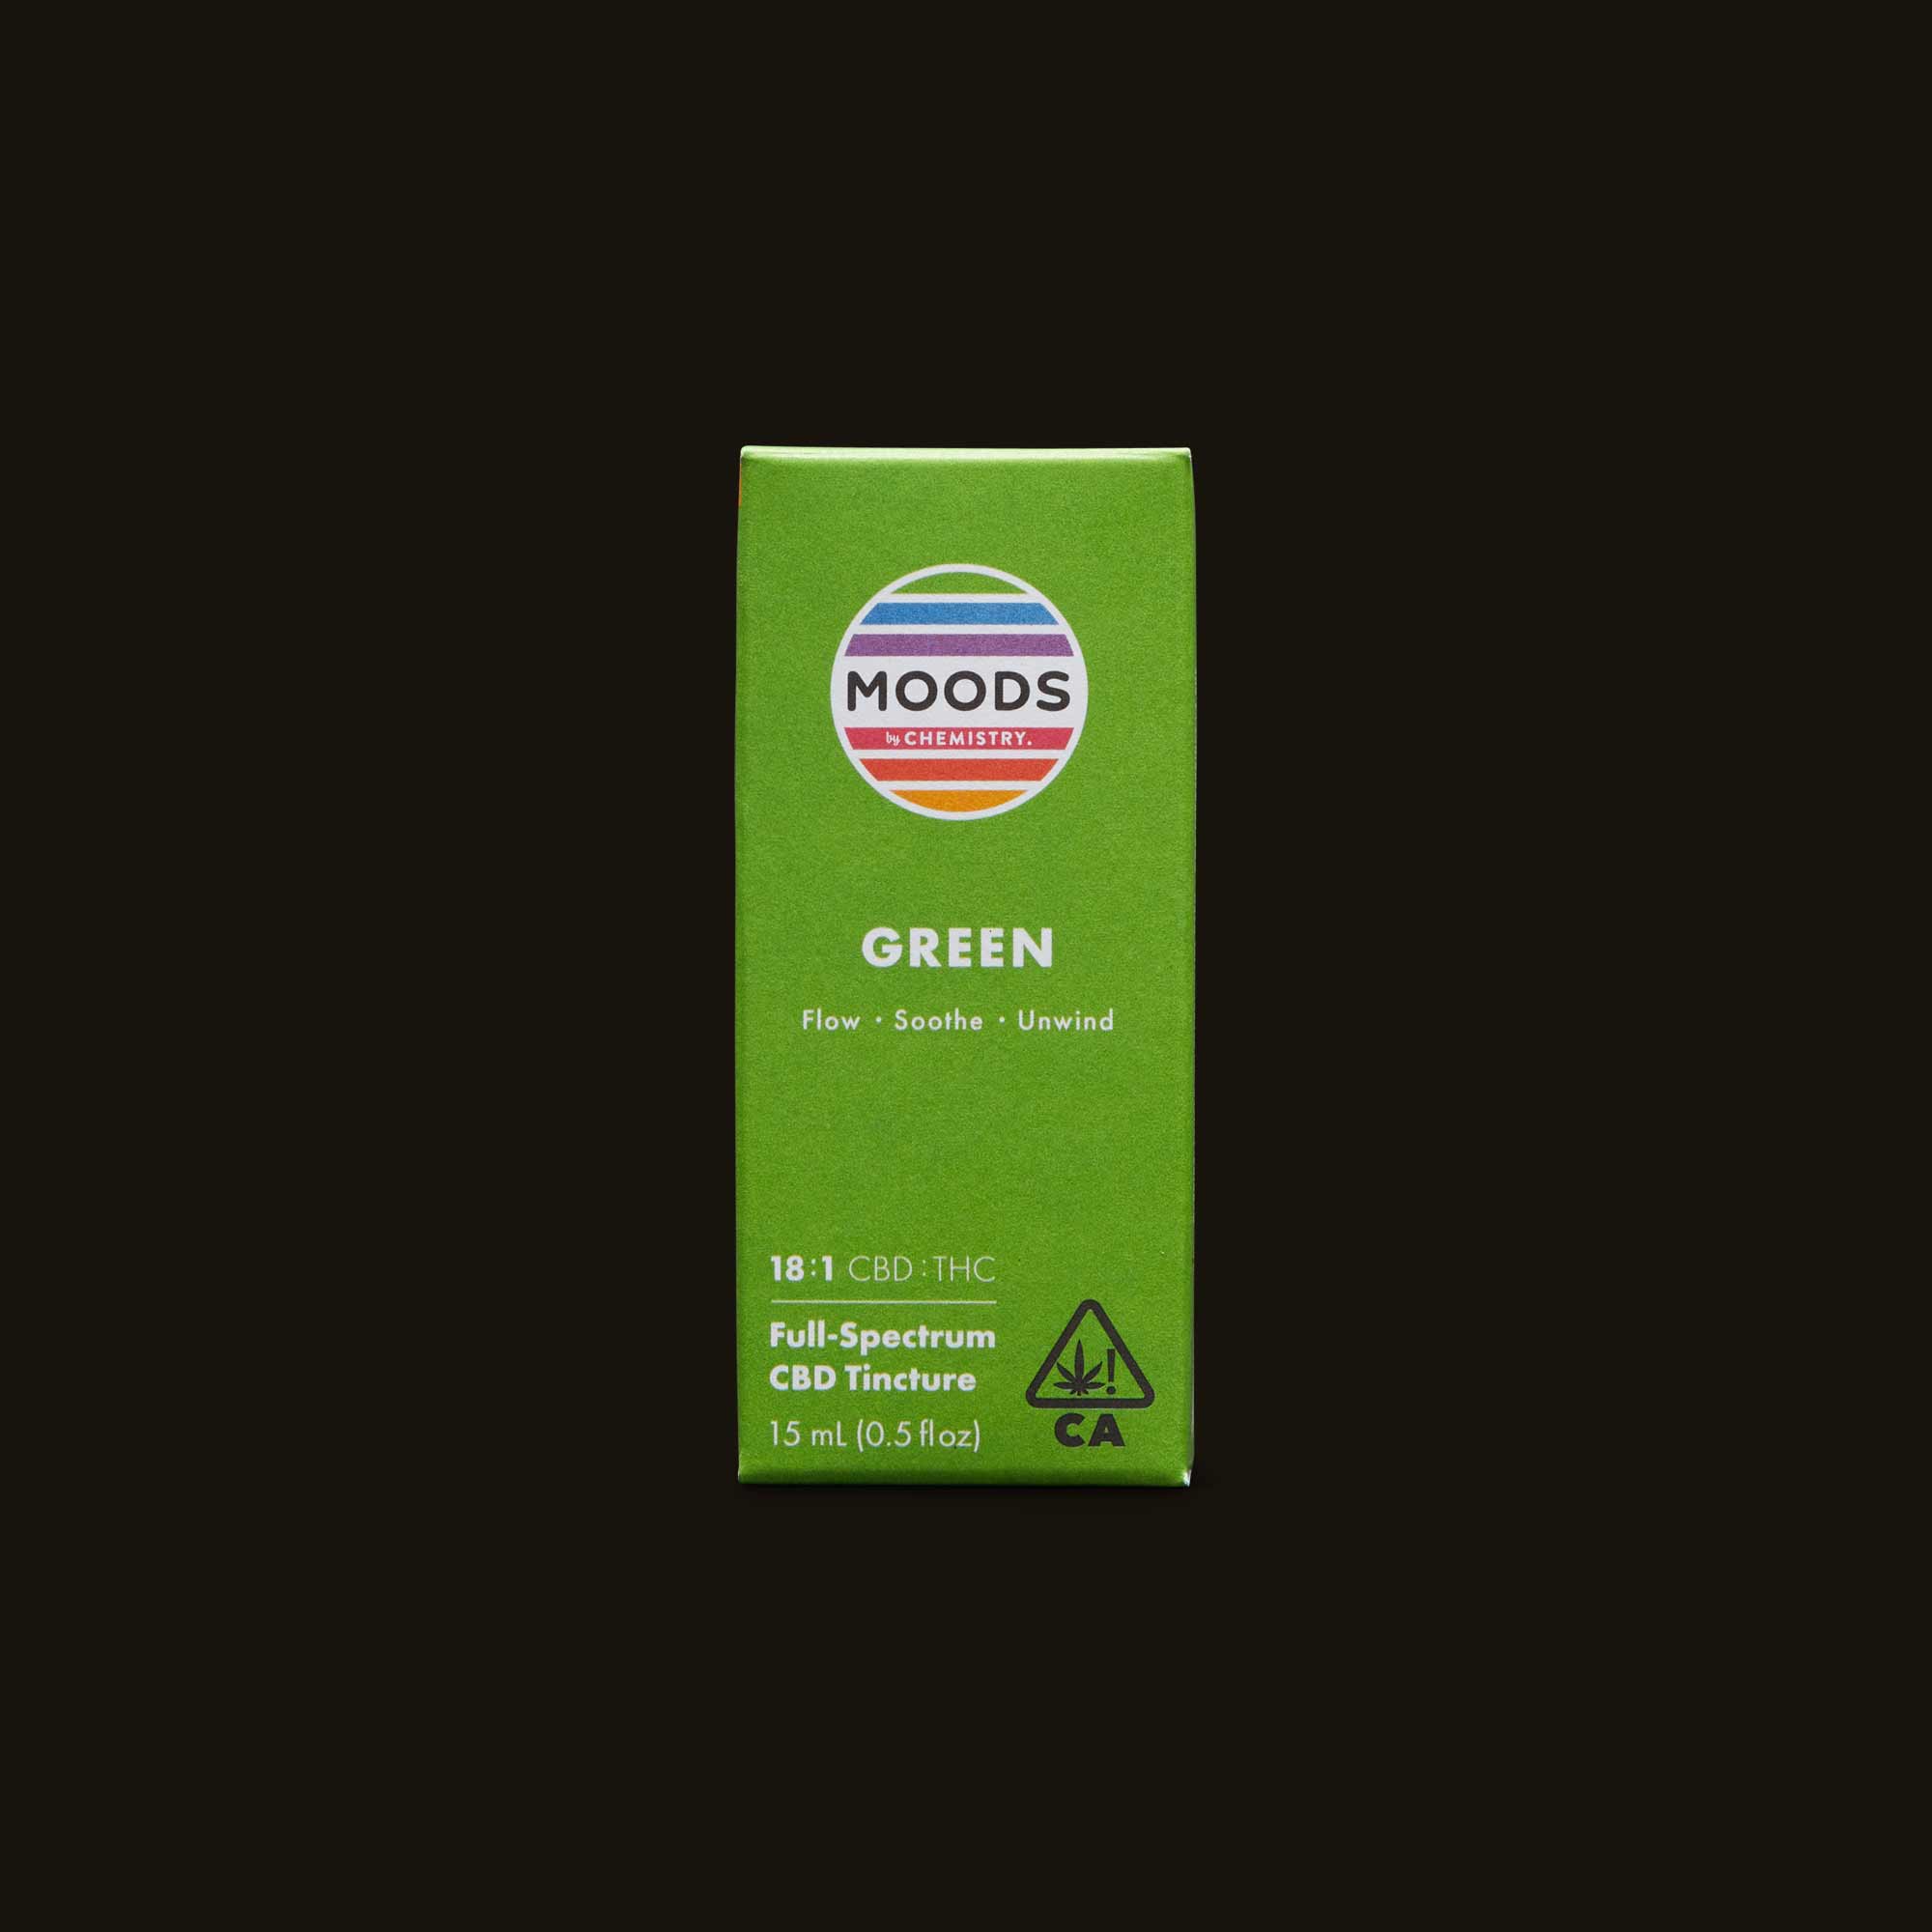 Chemisty-Green-Moods-Tincture-Front-CA-1810-796483